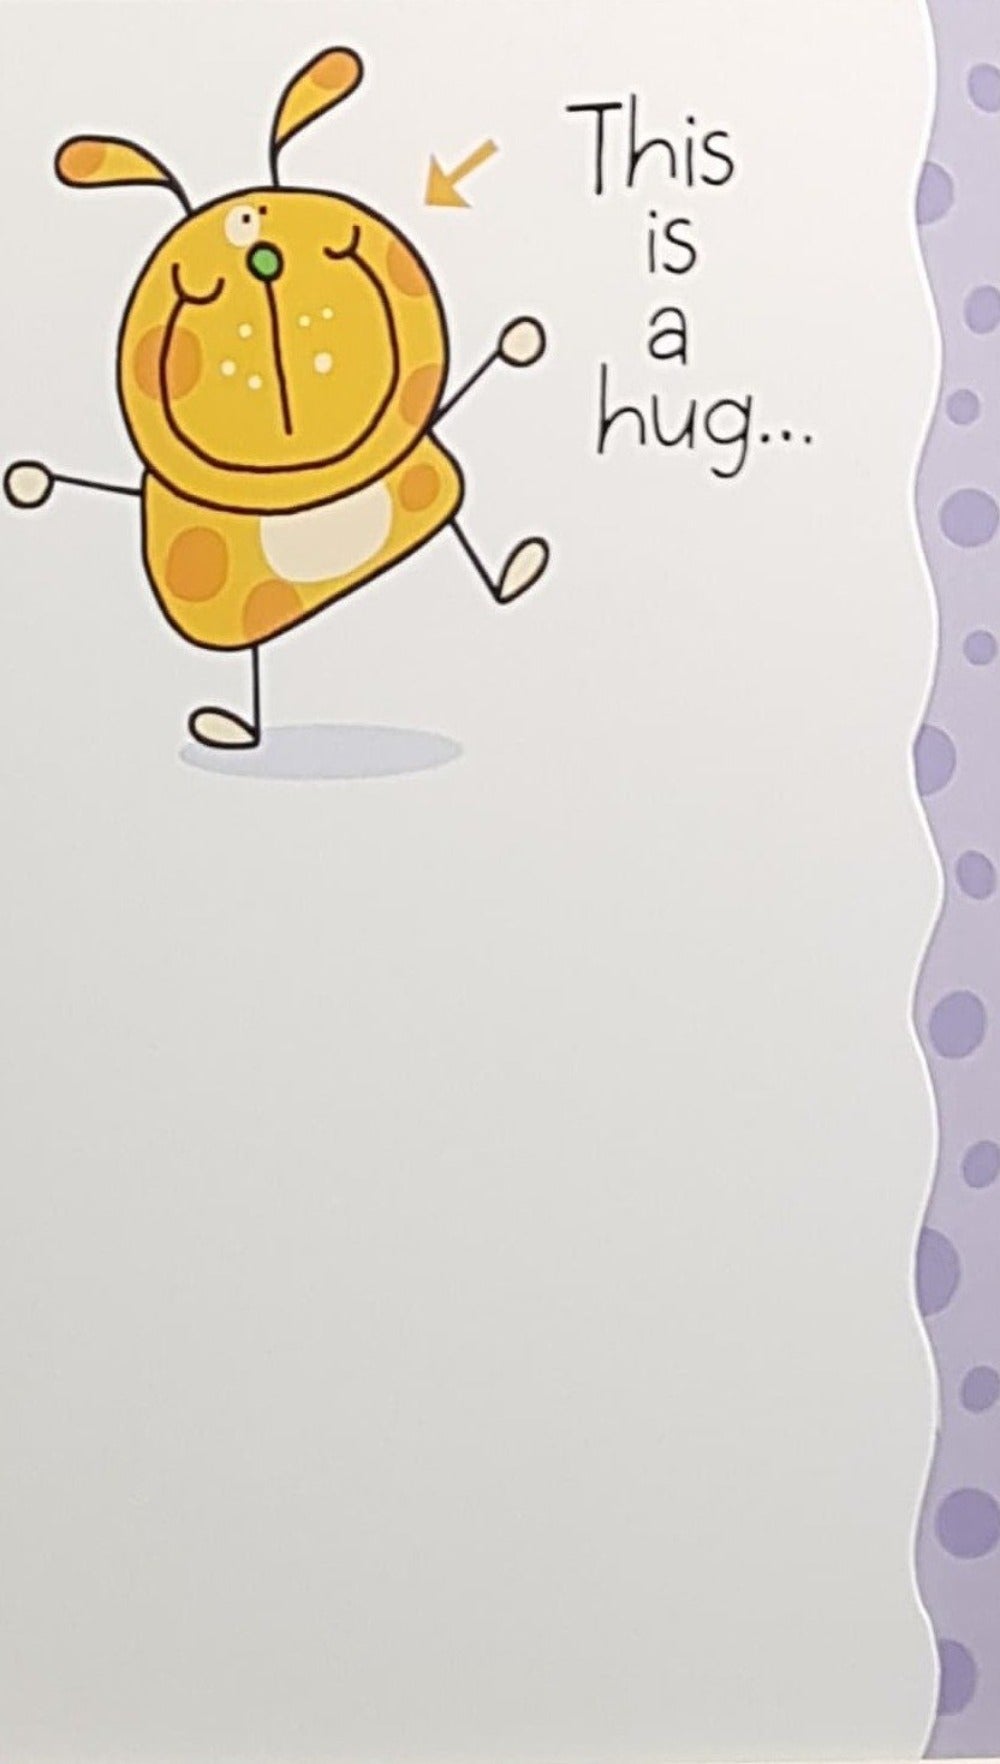 Thinking Of You Card - This Is A Hug...